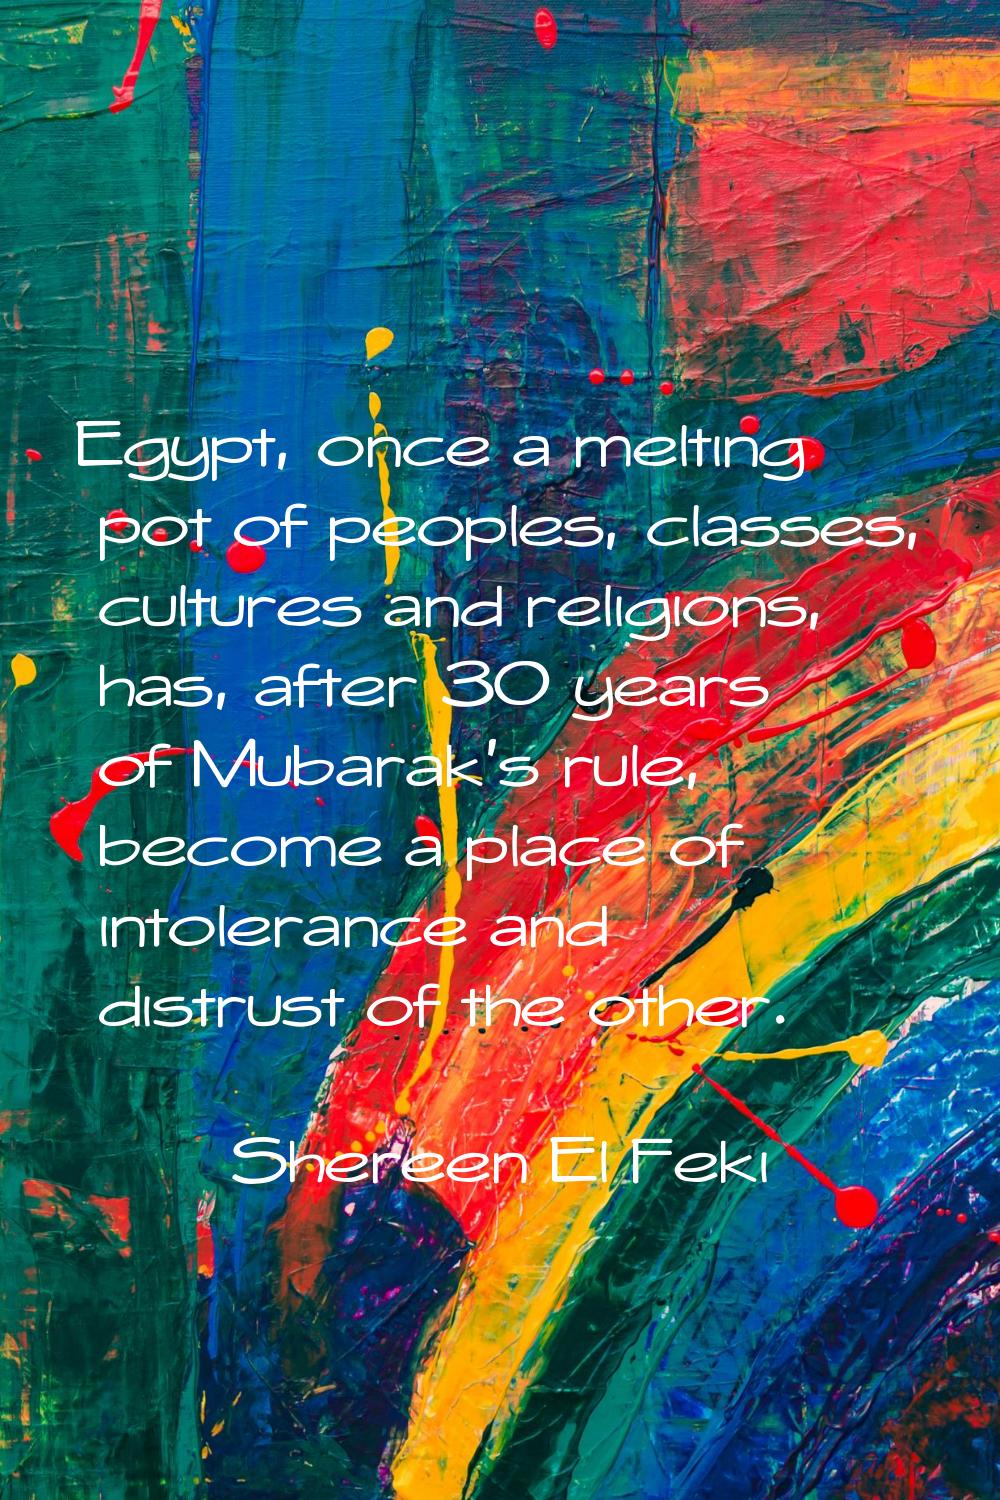 Egypt, once a melting pot of peoples, classes, cultures and religions, has, after 30 years of Mubar